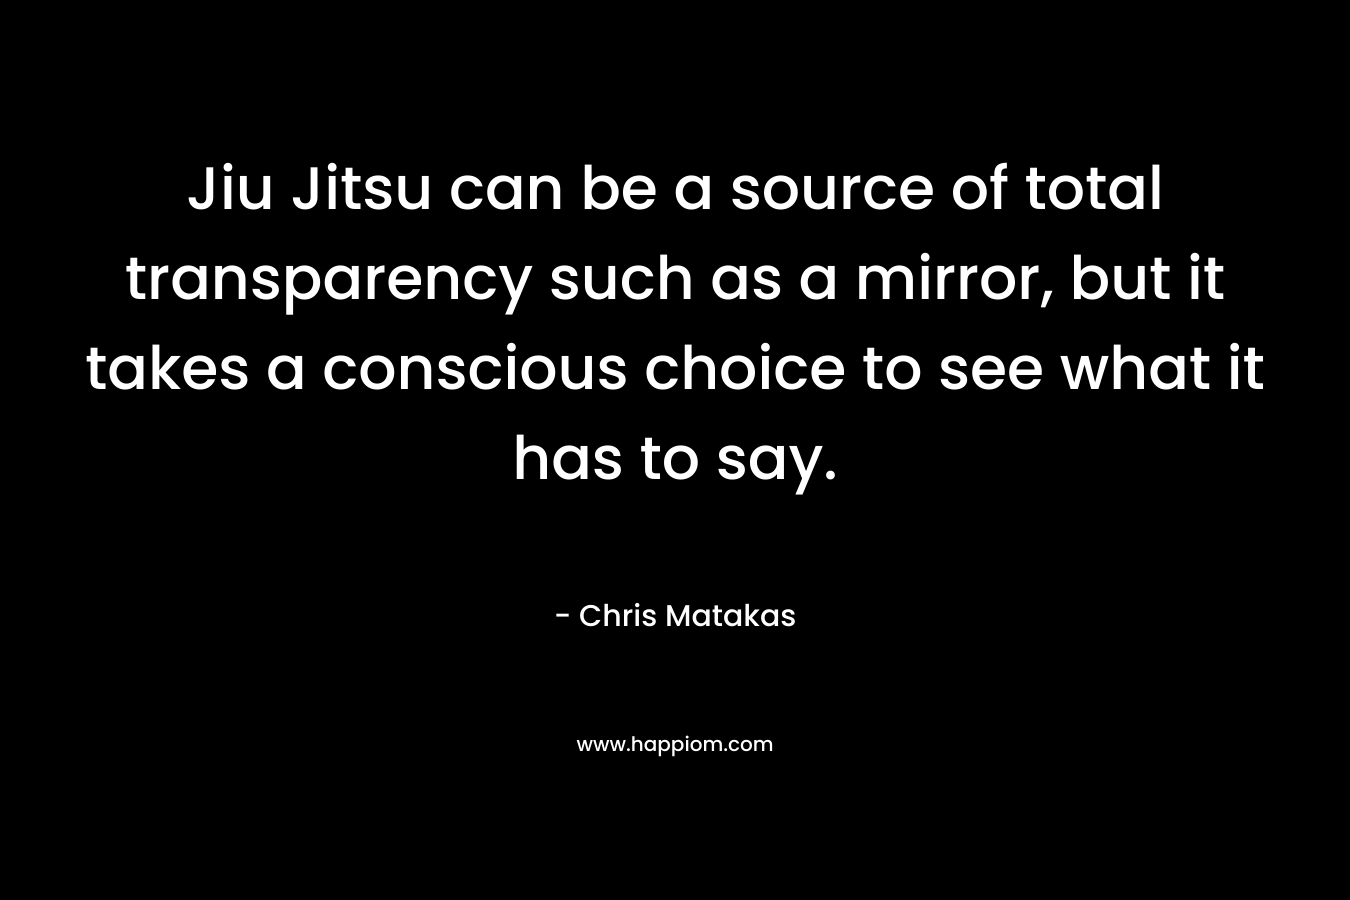 Jiu Jitsu can be a source of total transparency such as a mirror, but it takes a conscious choice to see what it has to say. – Chris Matakas